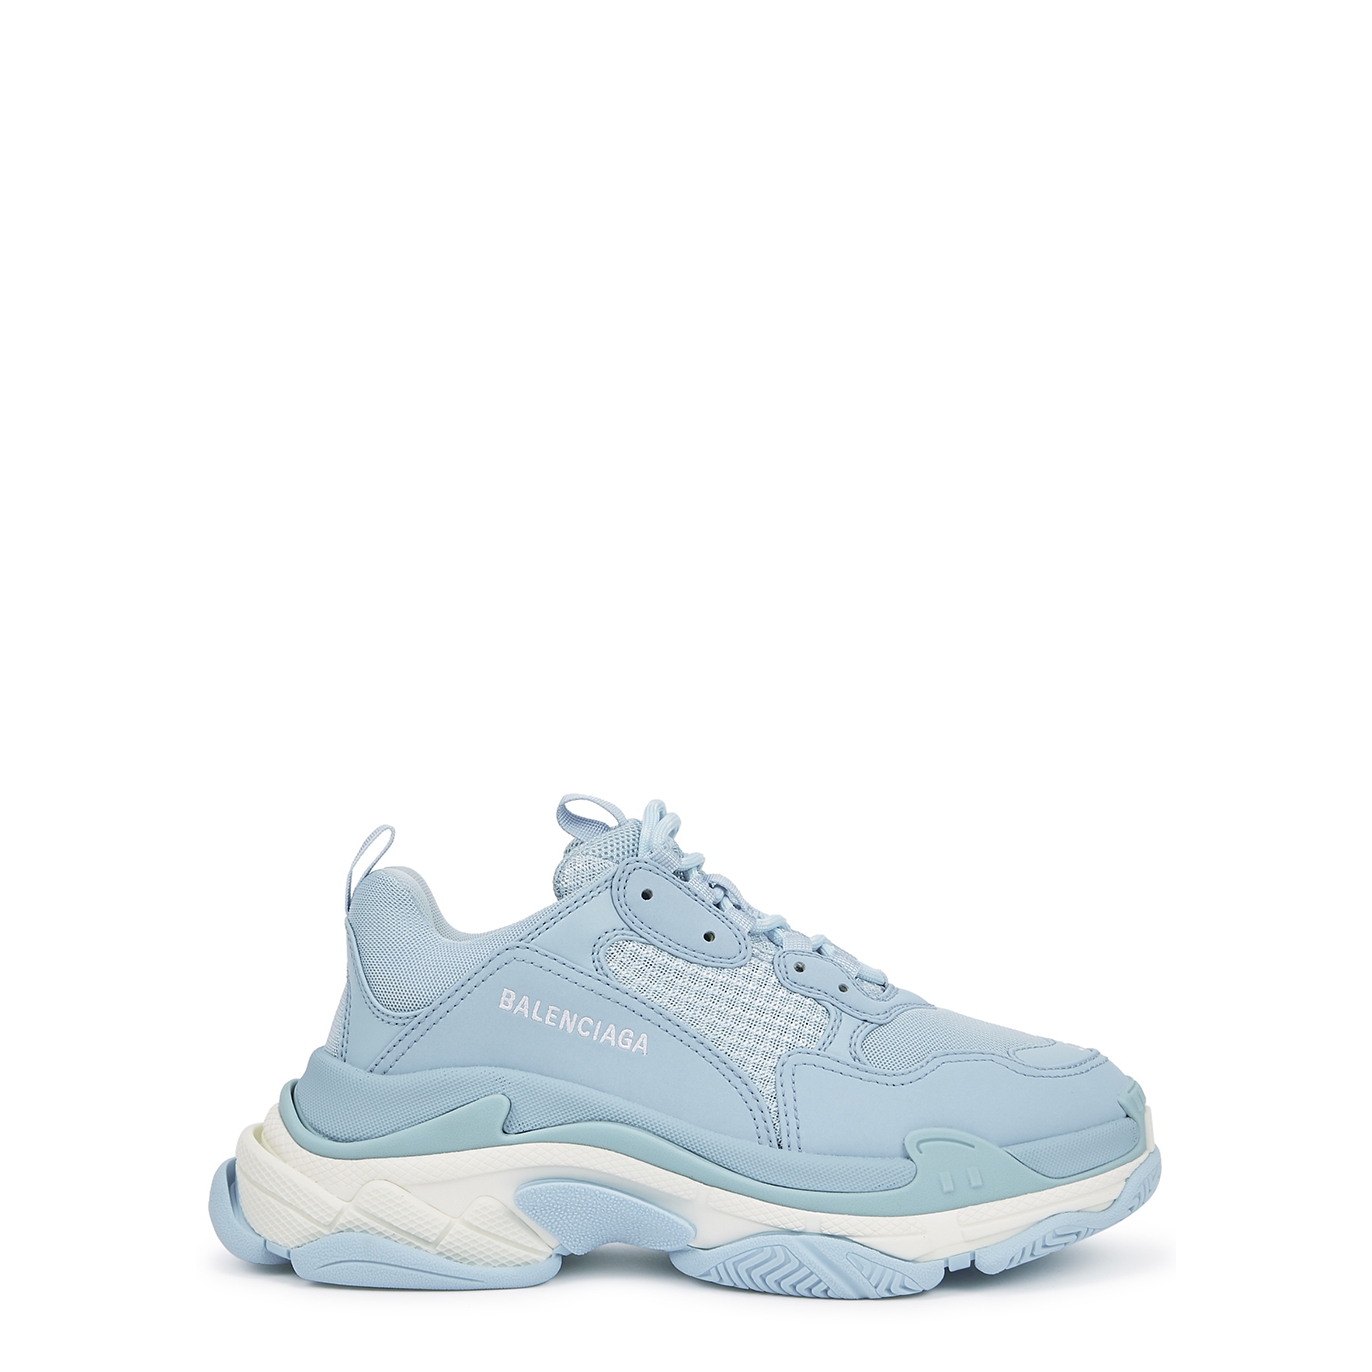 Balenciaga Triple S Blue Mesh And Leather Sneakers - Light Blue - 4